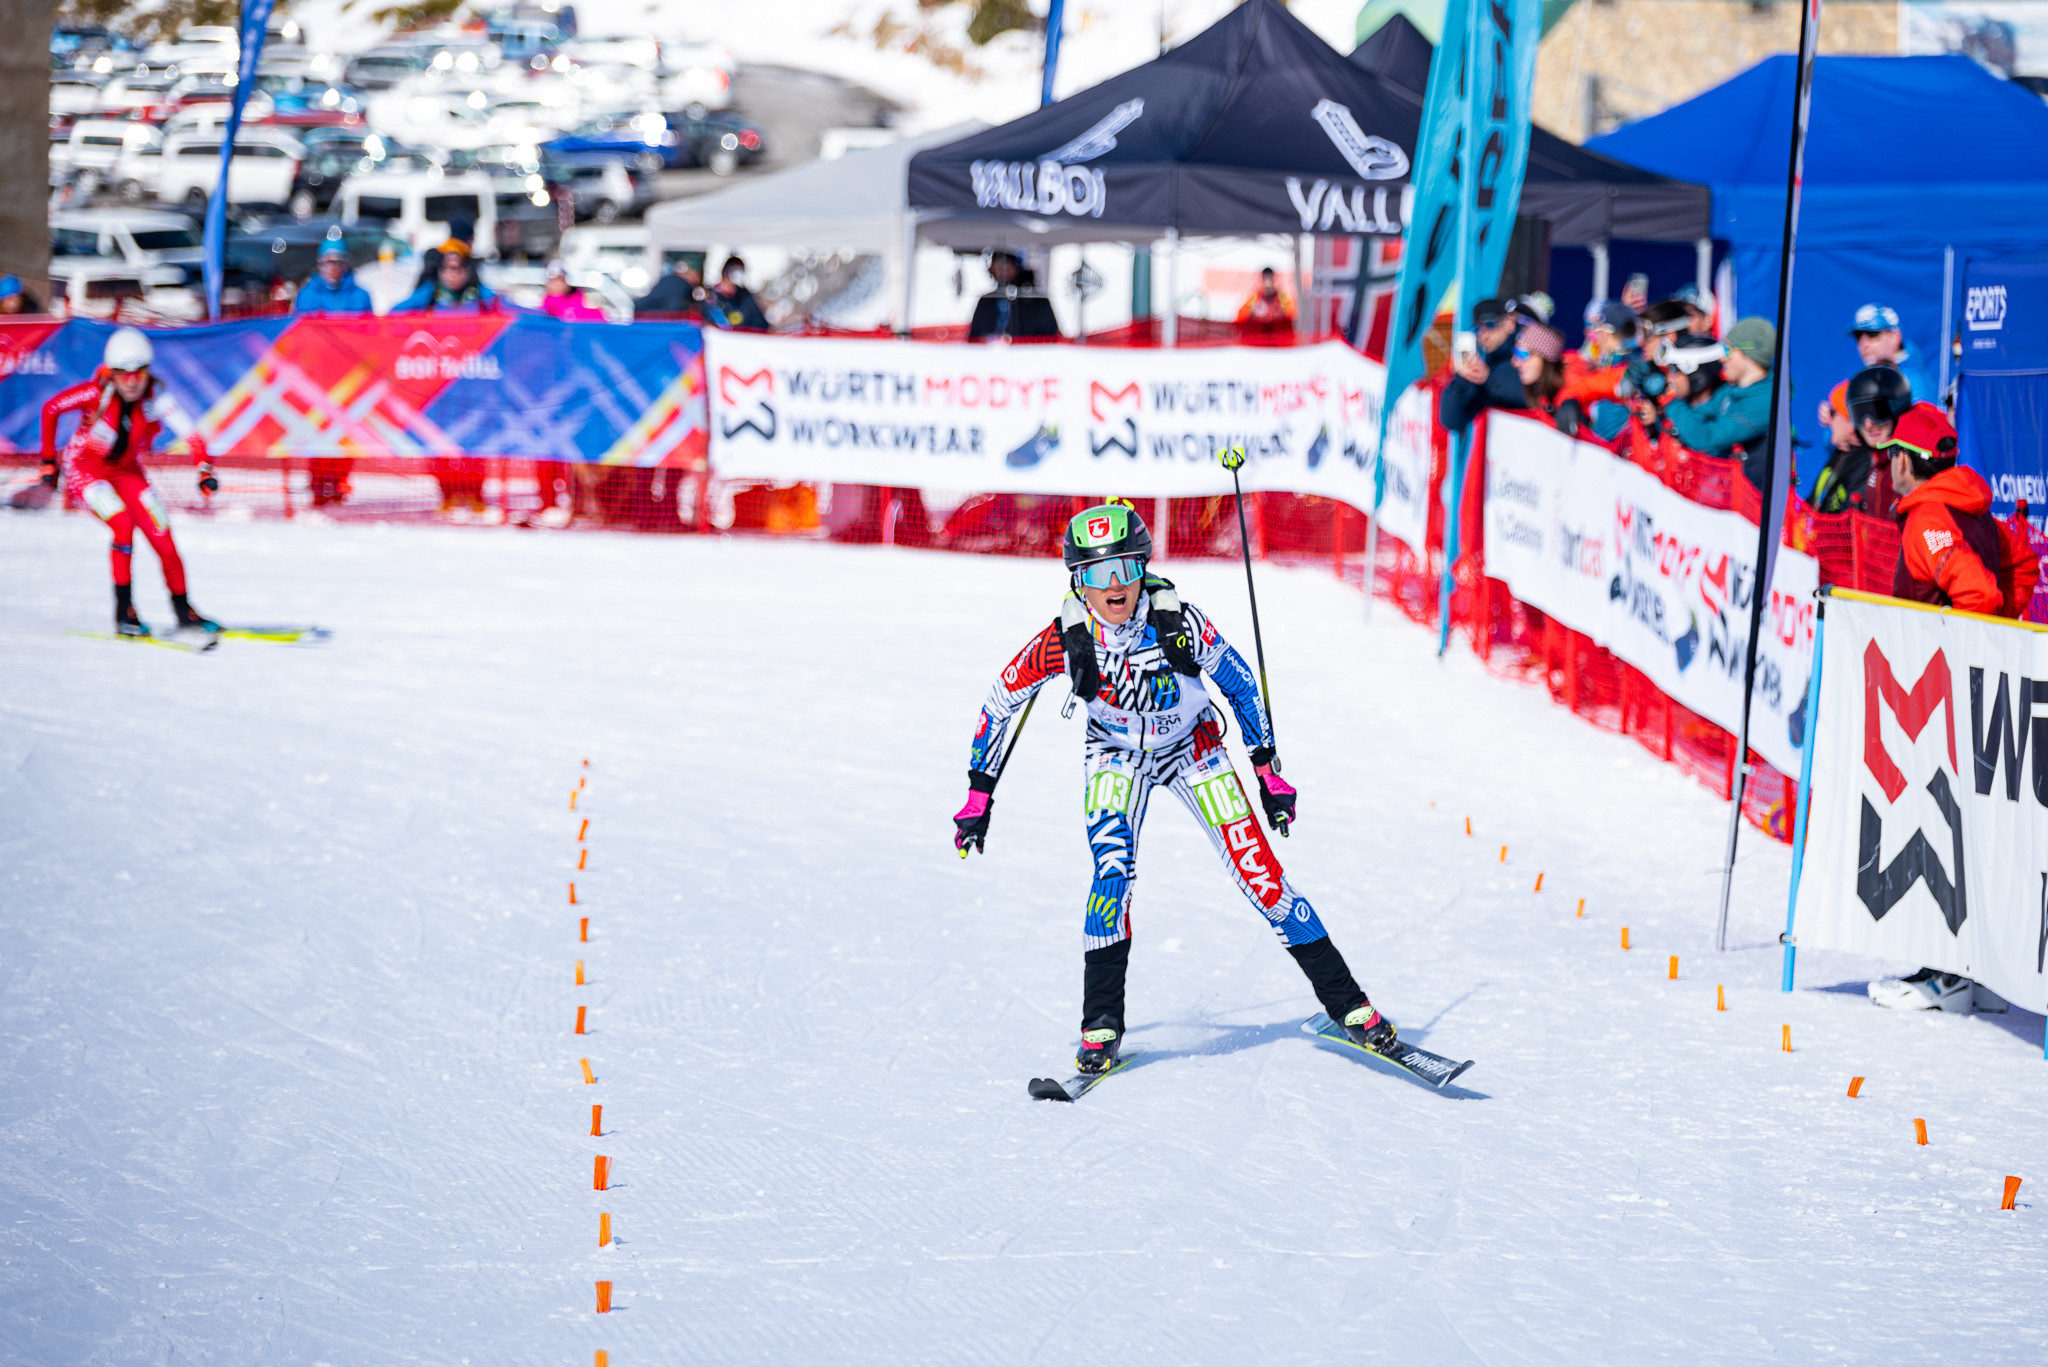 Marianna Jagerčíková's sprint victory was the first World Championship gold won by Slovakia in ski mountaineering ©ISMF